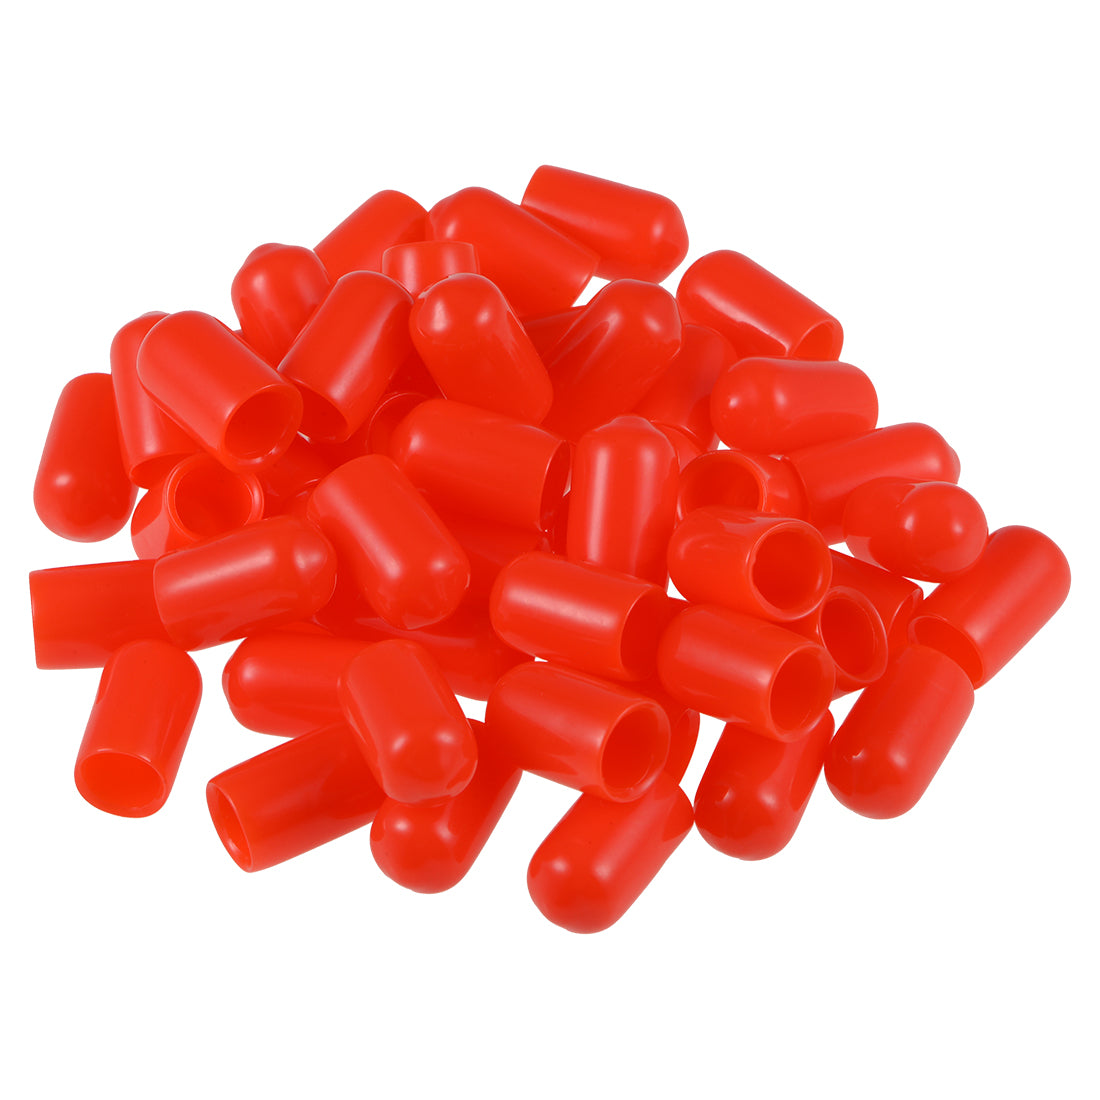 uxcell Uxcell 80pcs Rubber End Caps 7mm ID 15mm Height Screw Thread Protectors Red